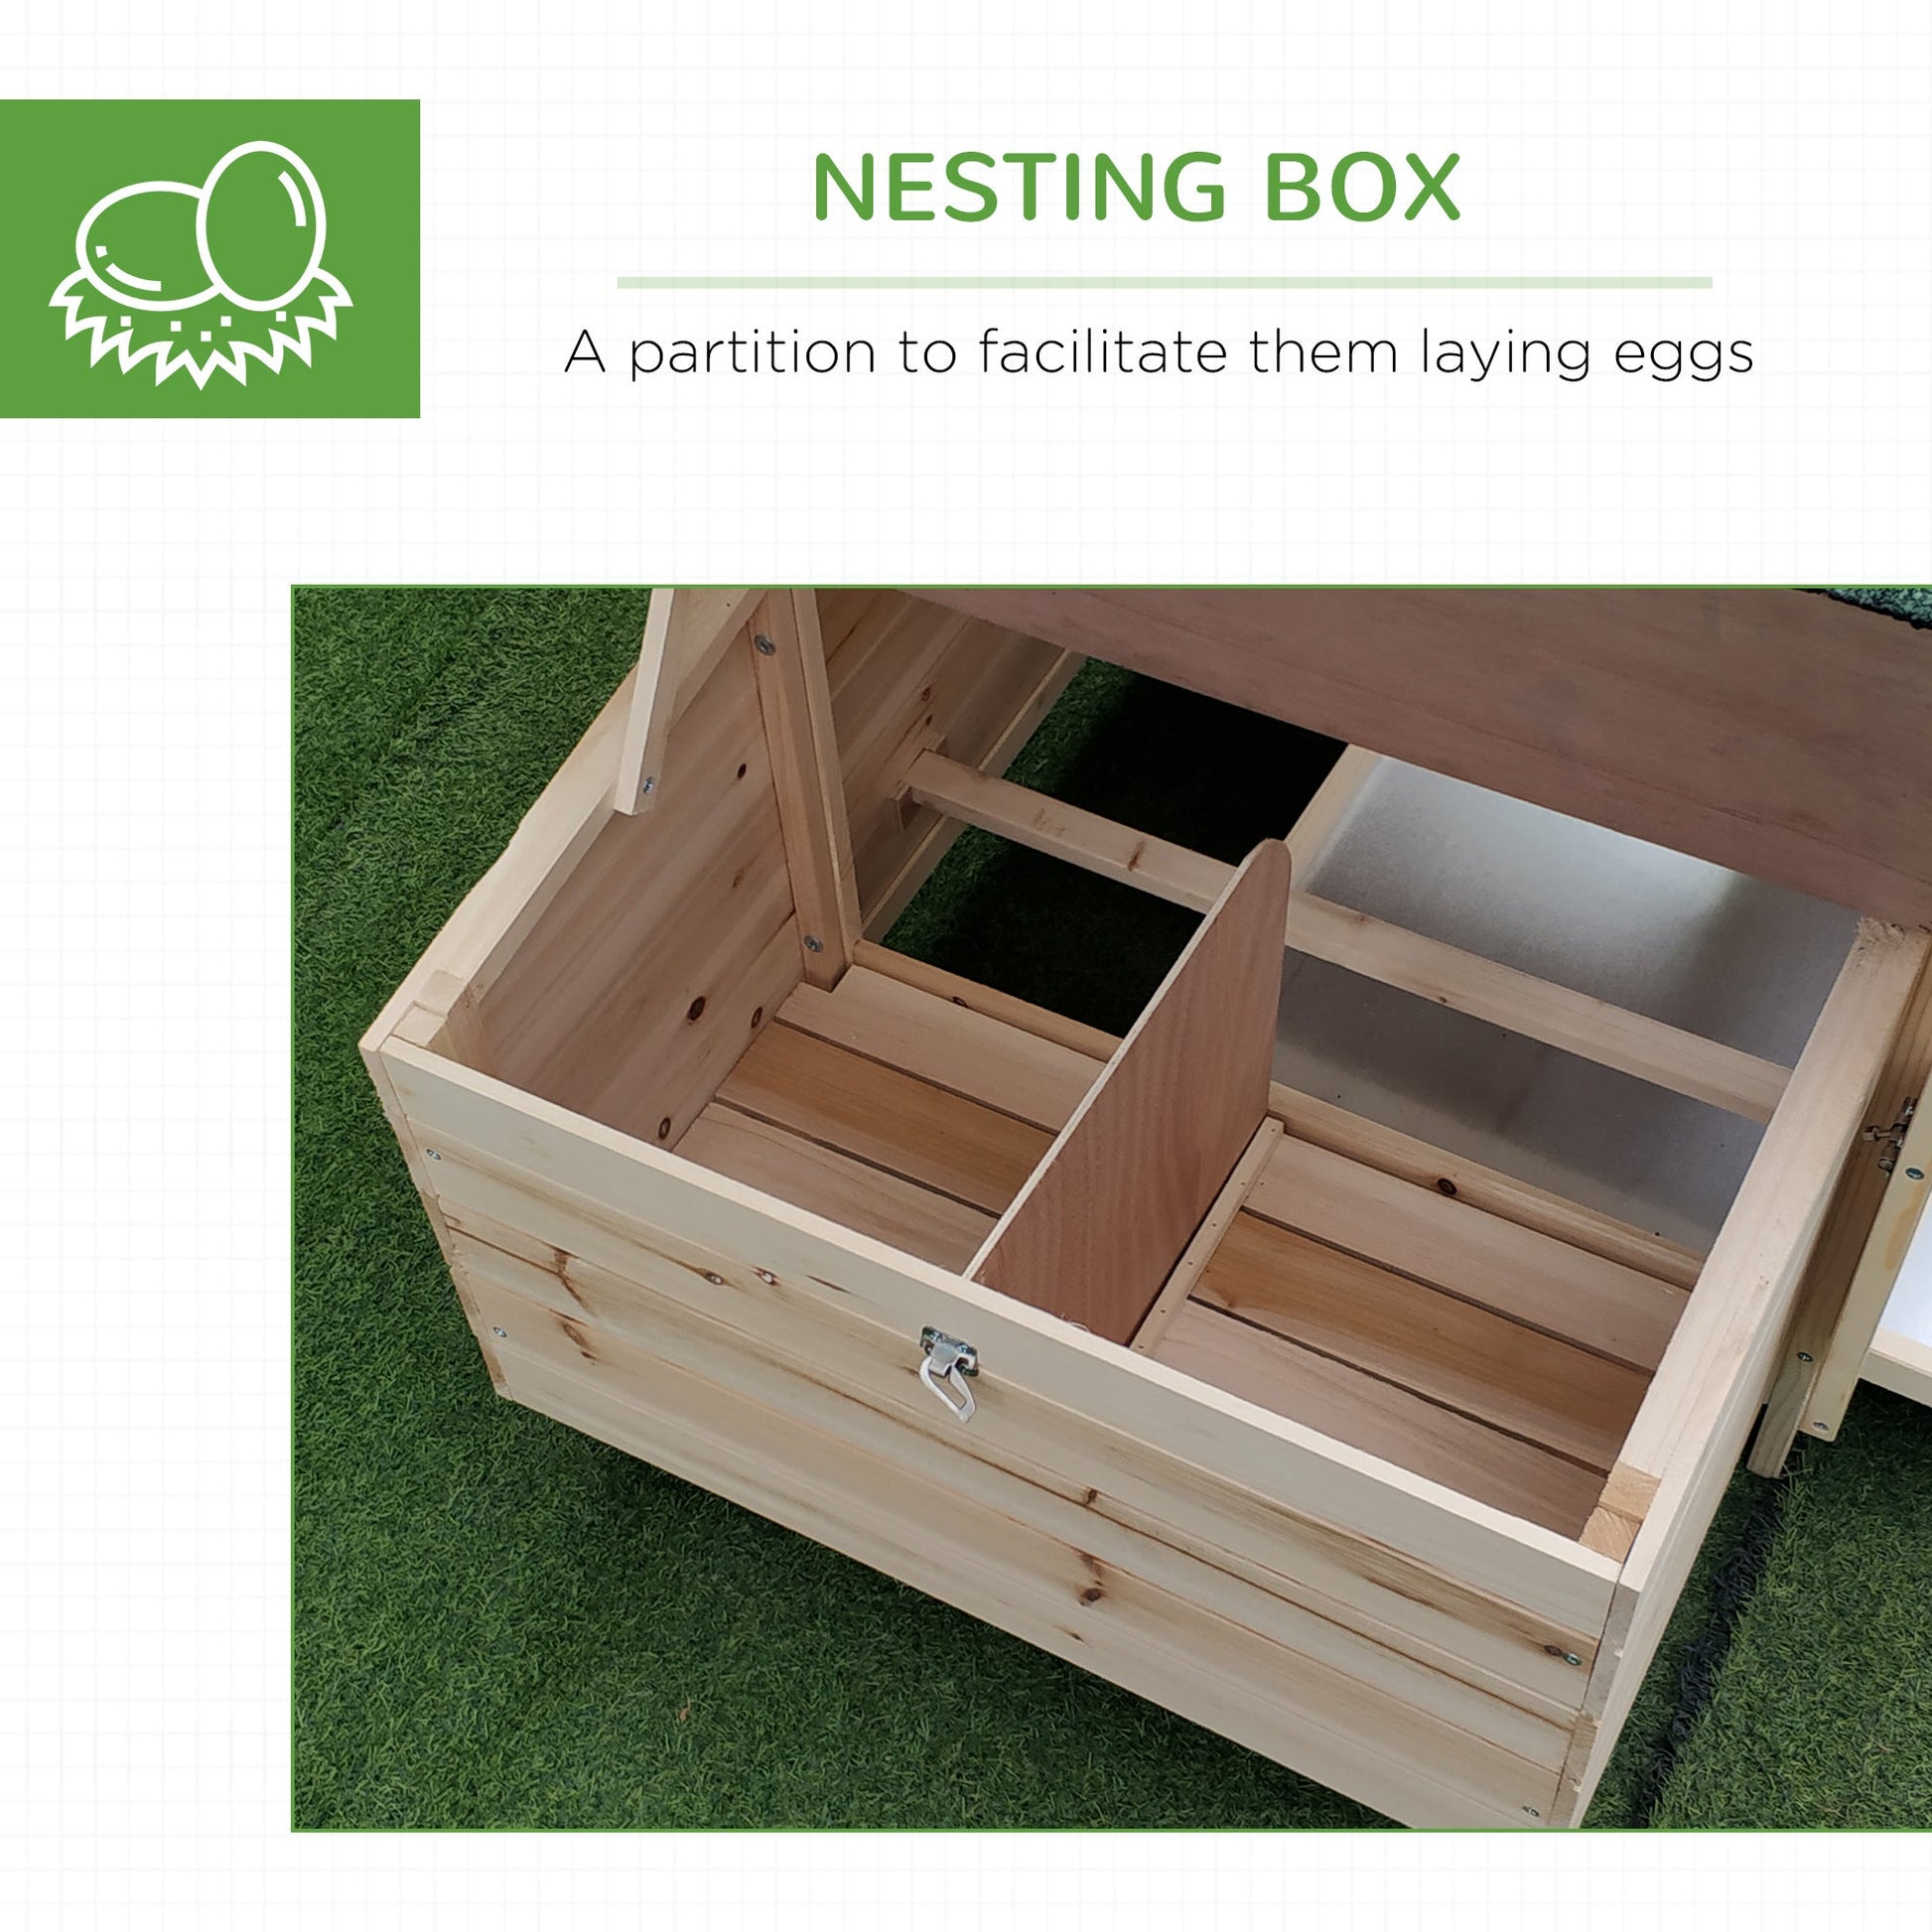 77" Chicken Coop Hen House Rabbit Hutch Poultry Cage Pen Outdoor Backyard with Nesting Box Run Natural - Gallery Canada